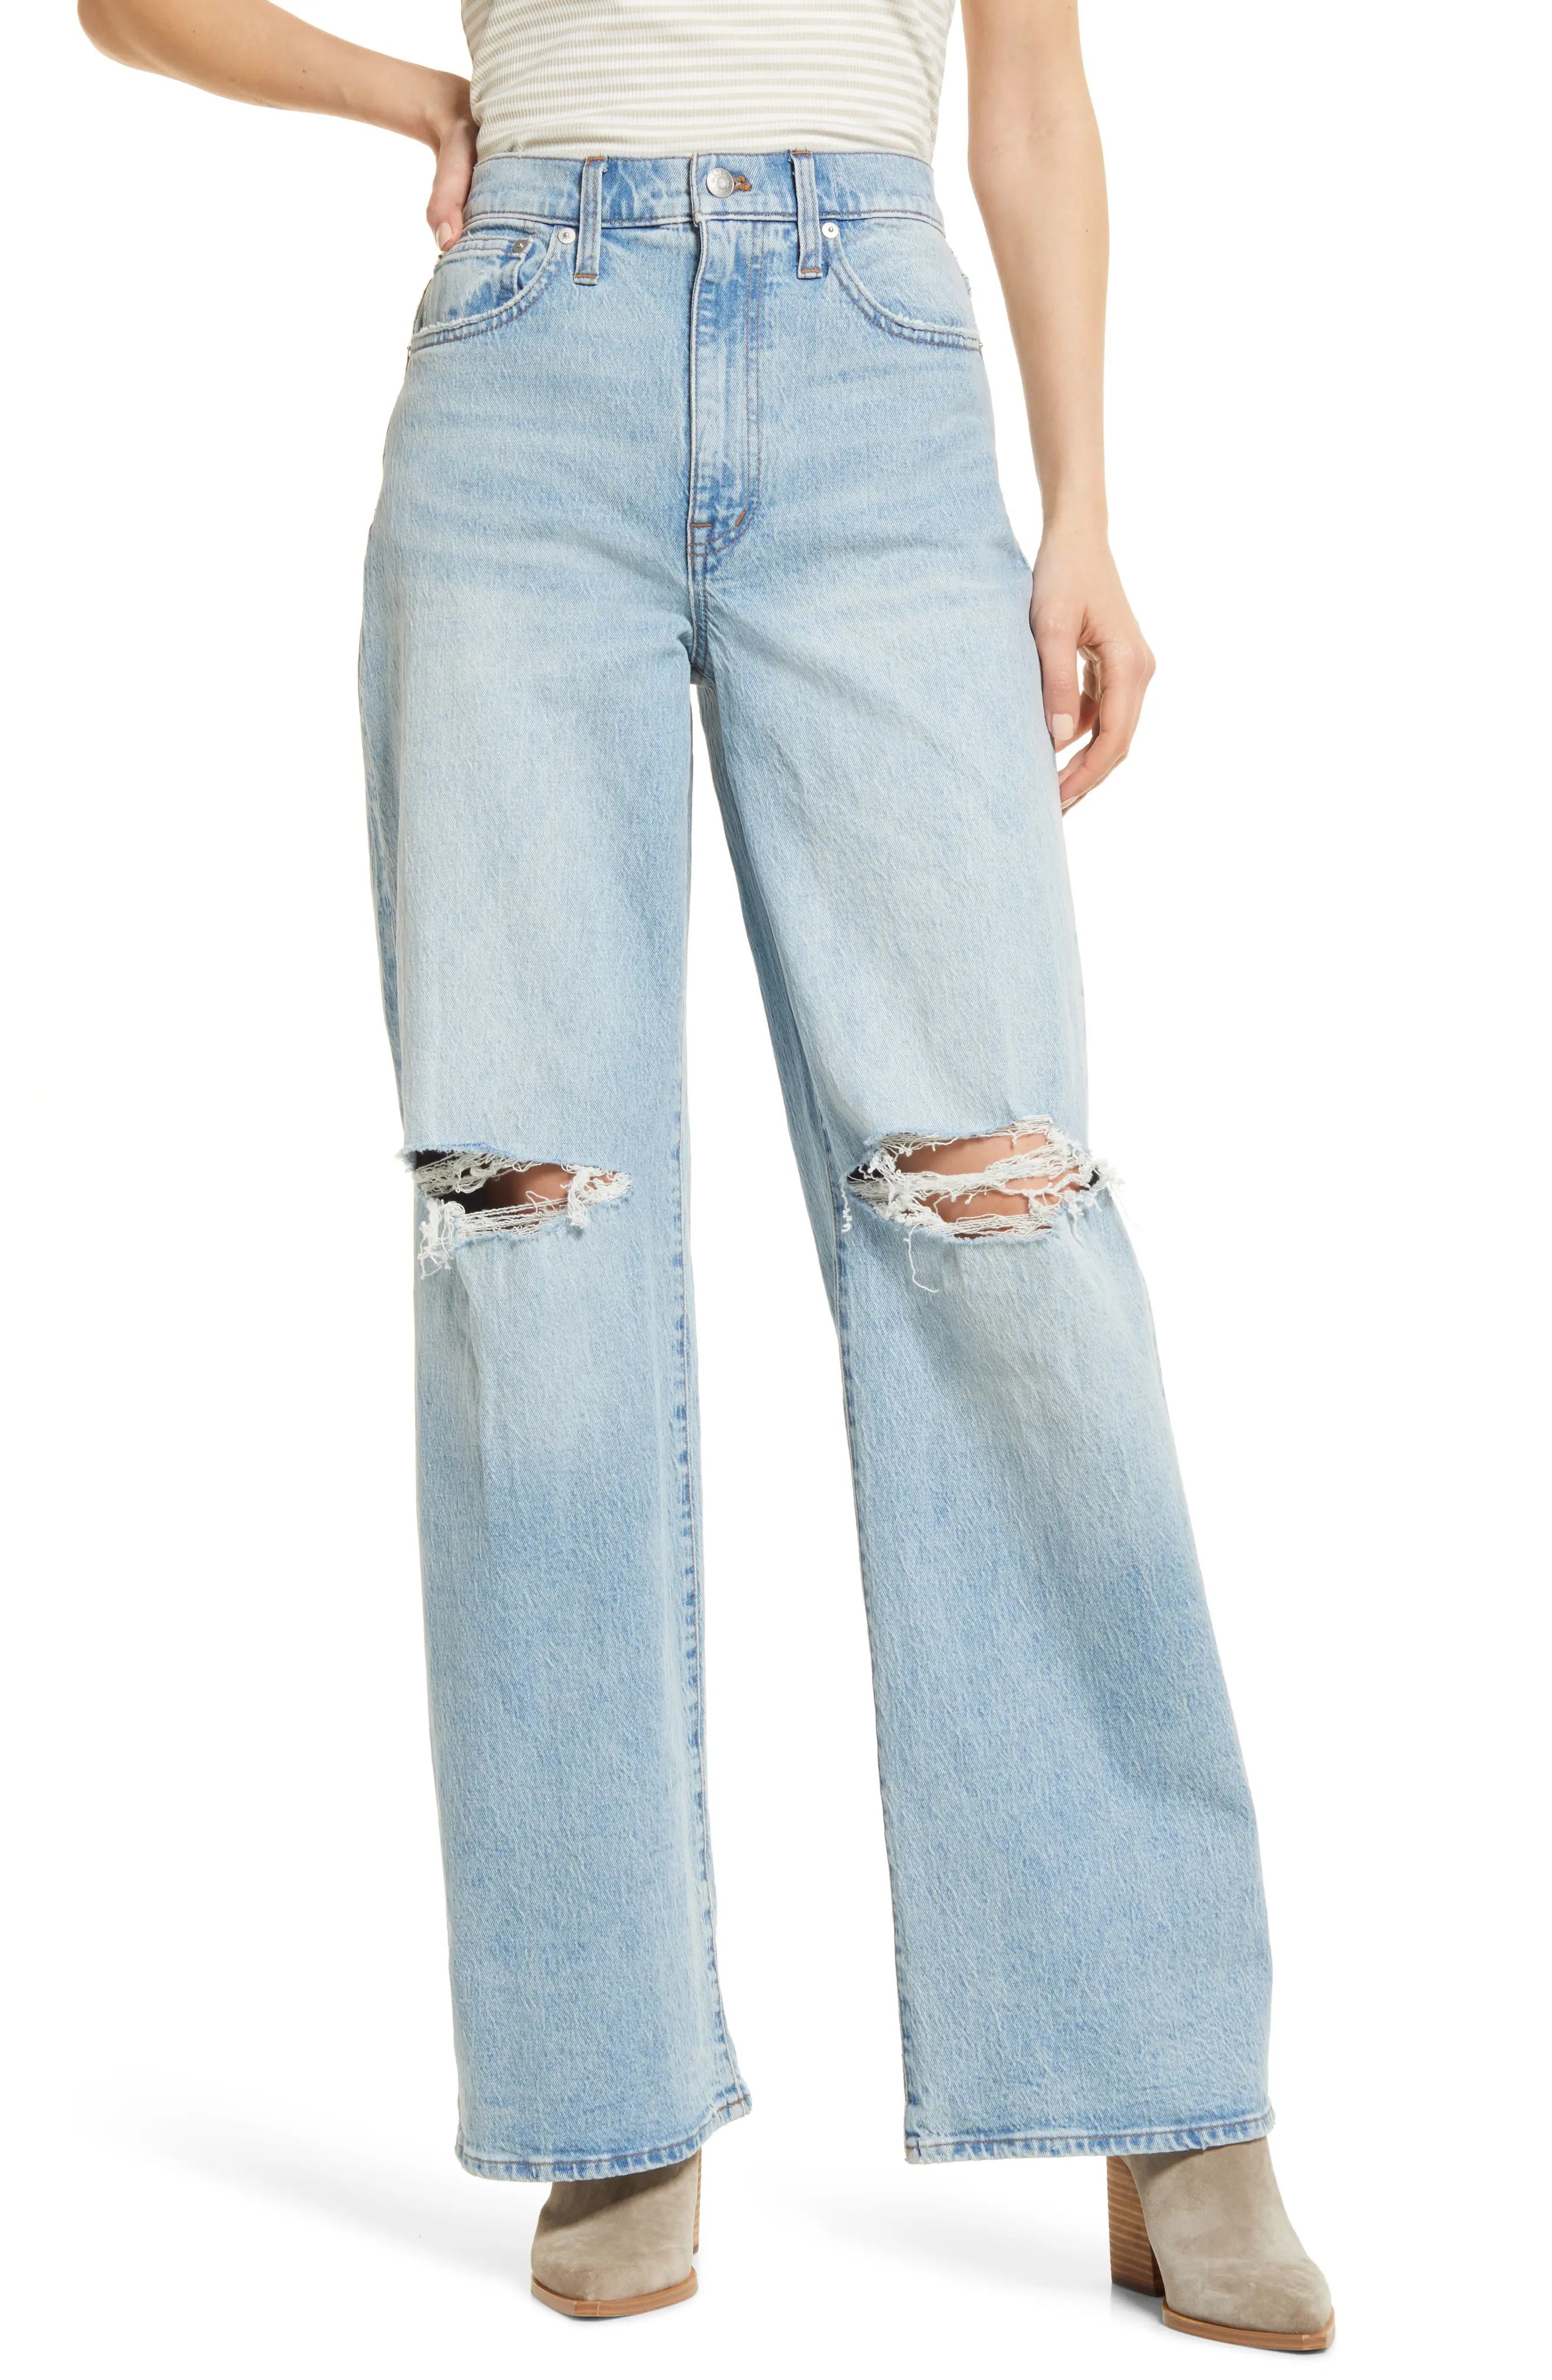 Madewell Women's Ripped High Waist Superwide Leg Jeans in Braisdell Wash at Nordstrom, Size 24 | Nordstrom